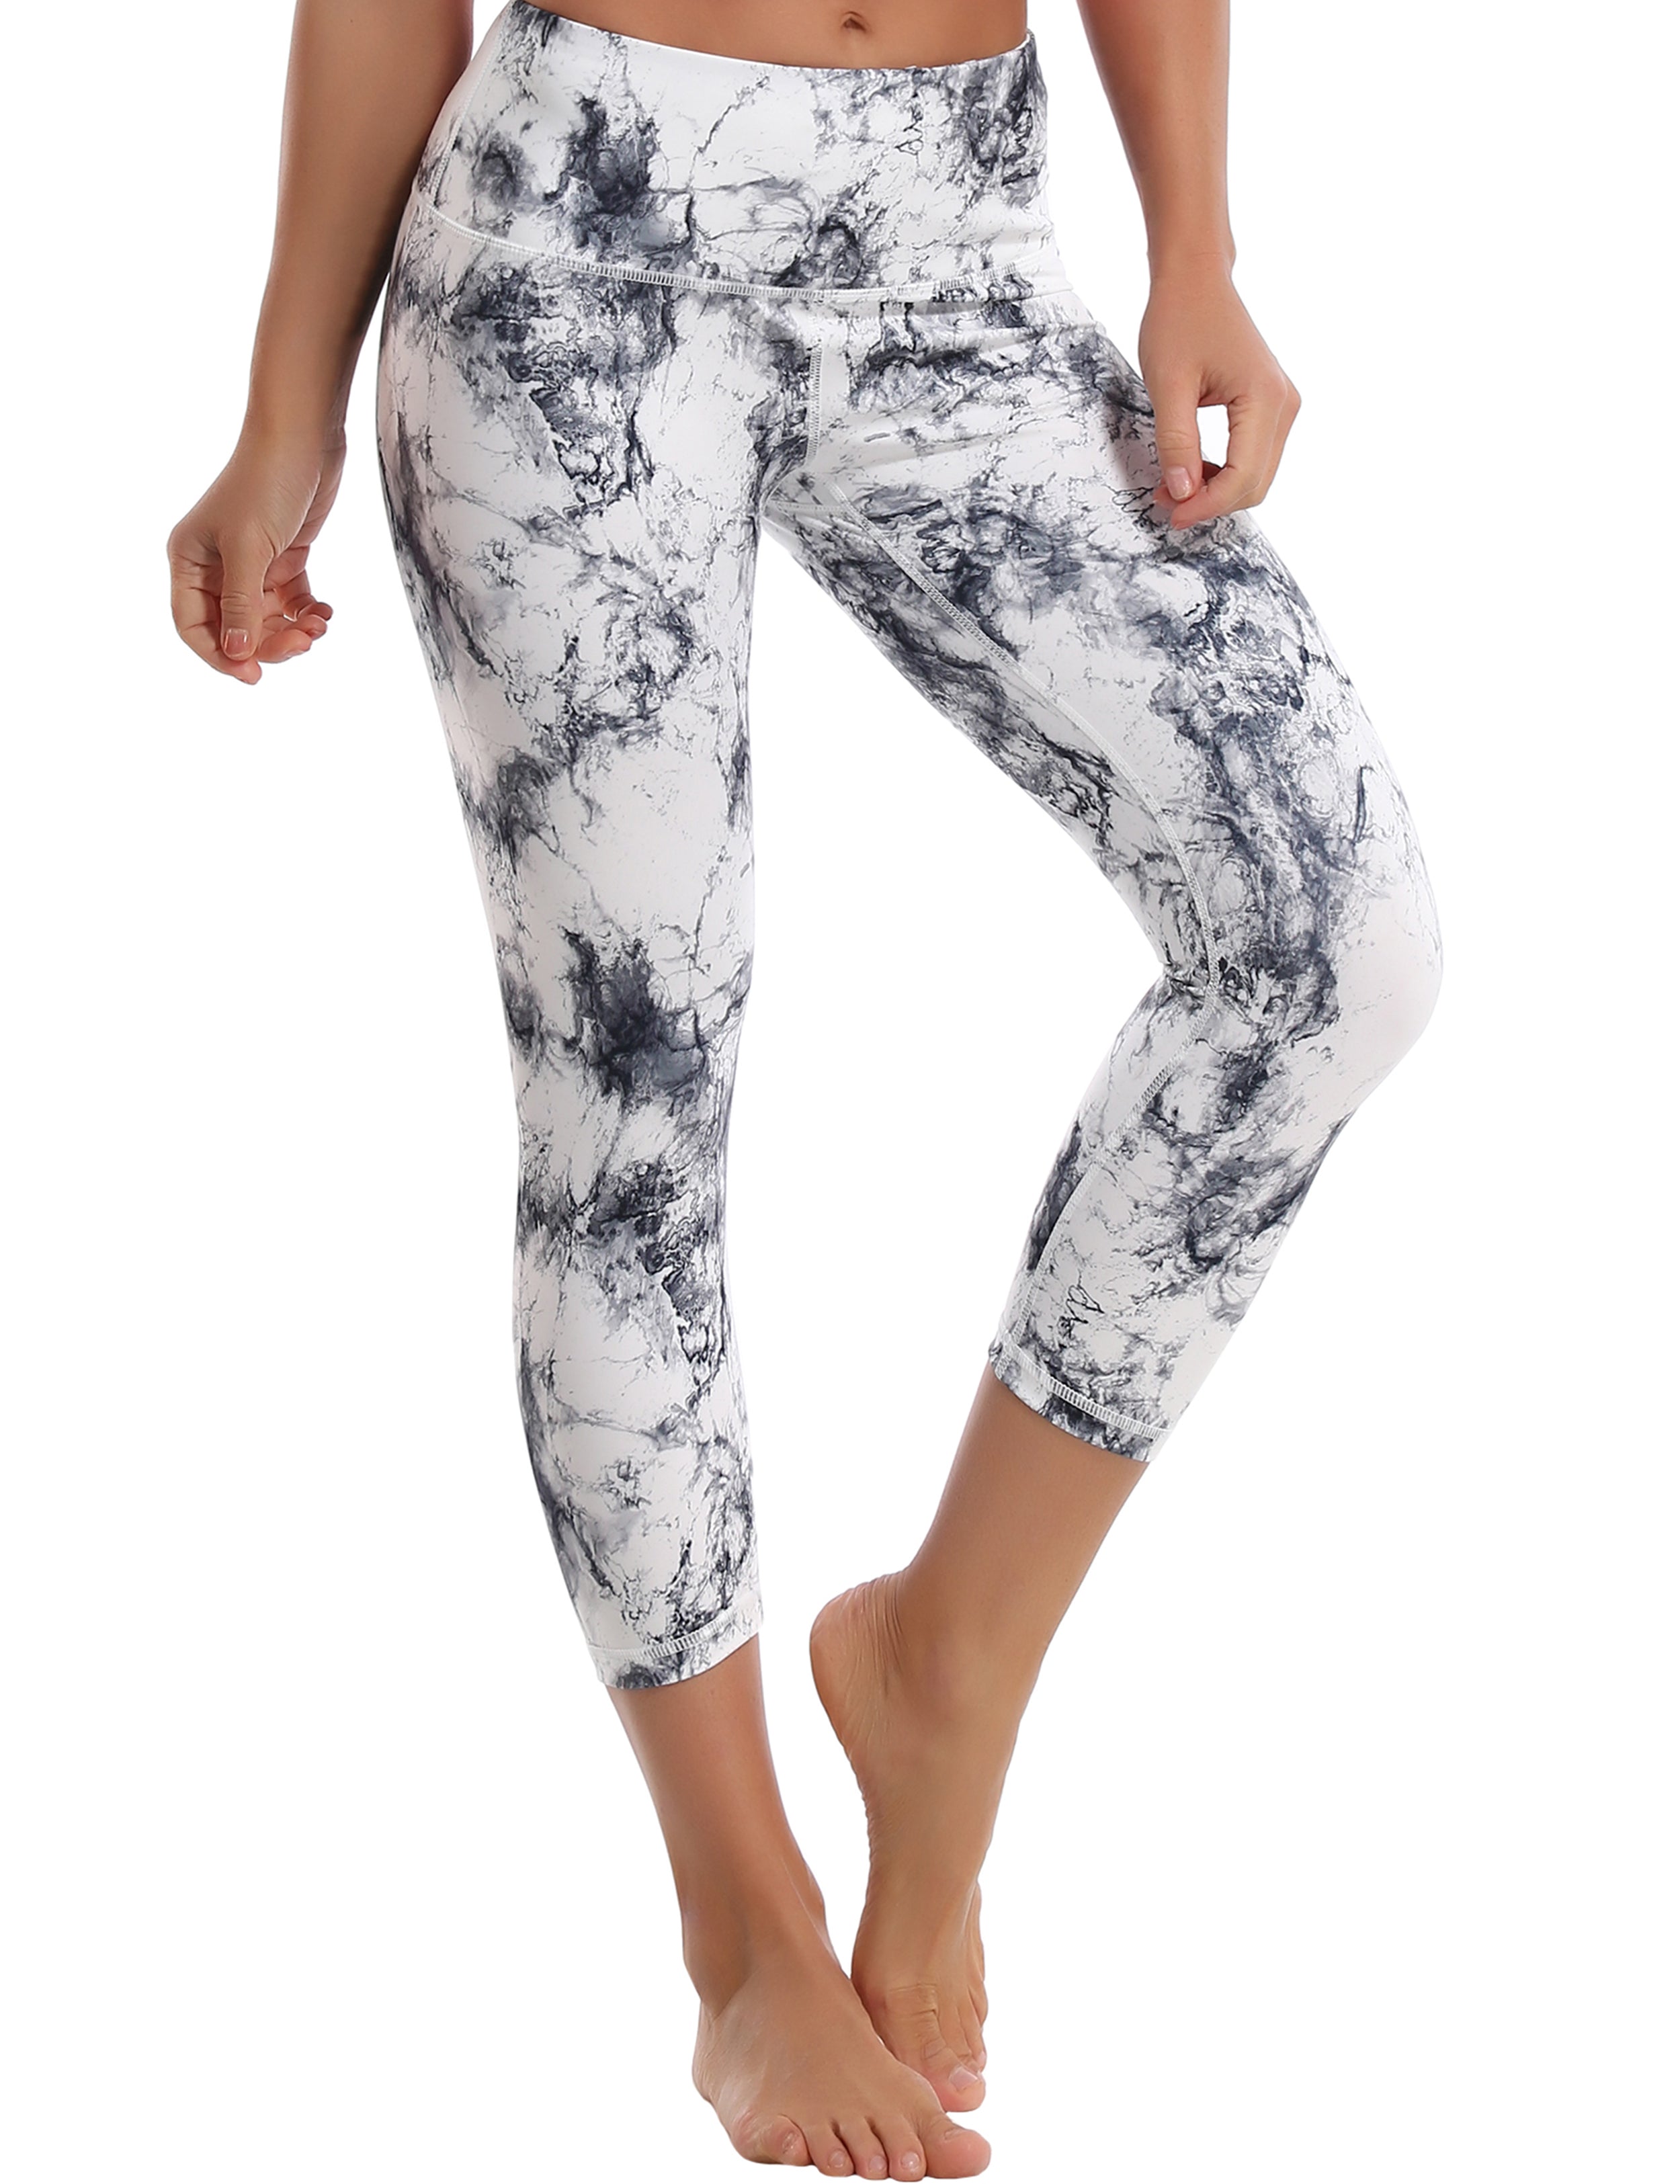 19" Printed Side Pockets Capris arabescato 75%Nylon/25%Spandex Fabric doesn't attract lint easily 4-way stretch No see-through Moisture-wicking Tummy control Inner pocket